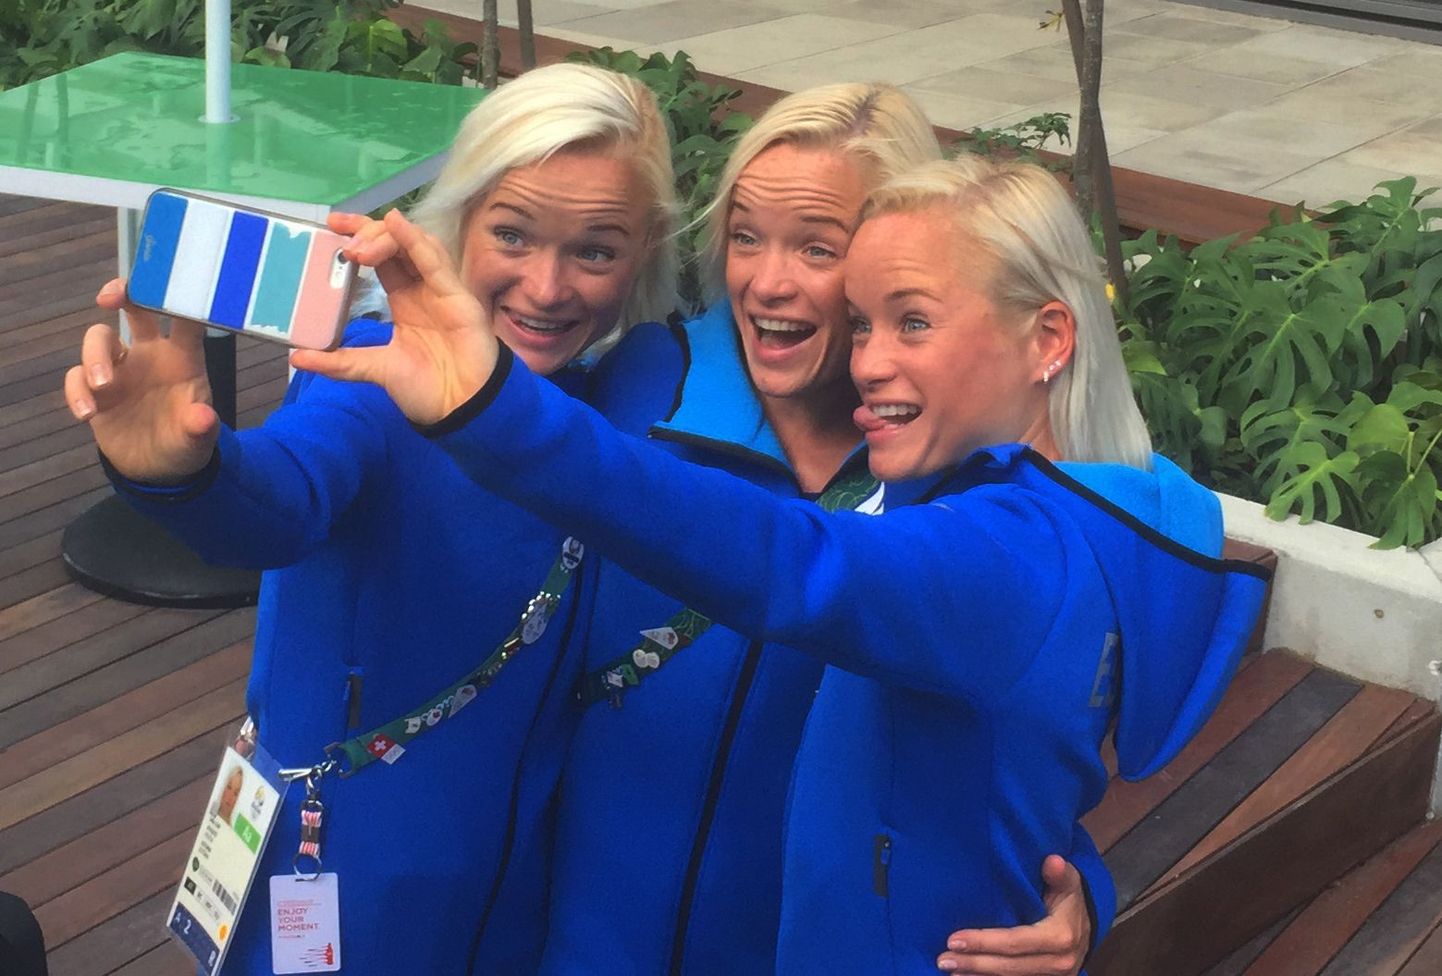 In this Friday, Aug. 12, 2016 photo, Estonian triplets, from left, Leila, Liina and Lily Luik take a selfie outside the Main Press Center at the 2016 Summer Olympics in Rio de Janeiro, Brazil. Olympic spectators face the challenge Sunday, Aug. 14 of trying to tell the blonde sisters apart from afar in the marathon at the Rio de Janeiro Games. (AP Photo/Rob Harris)